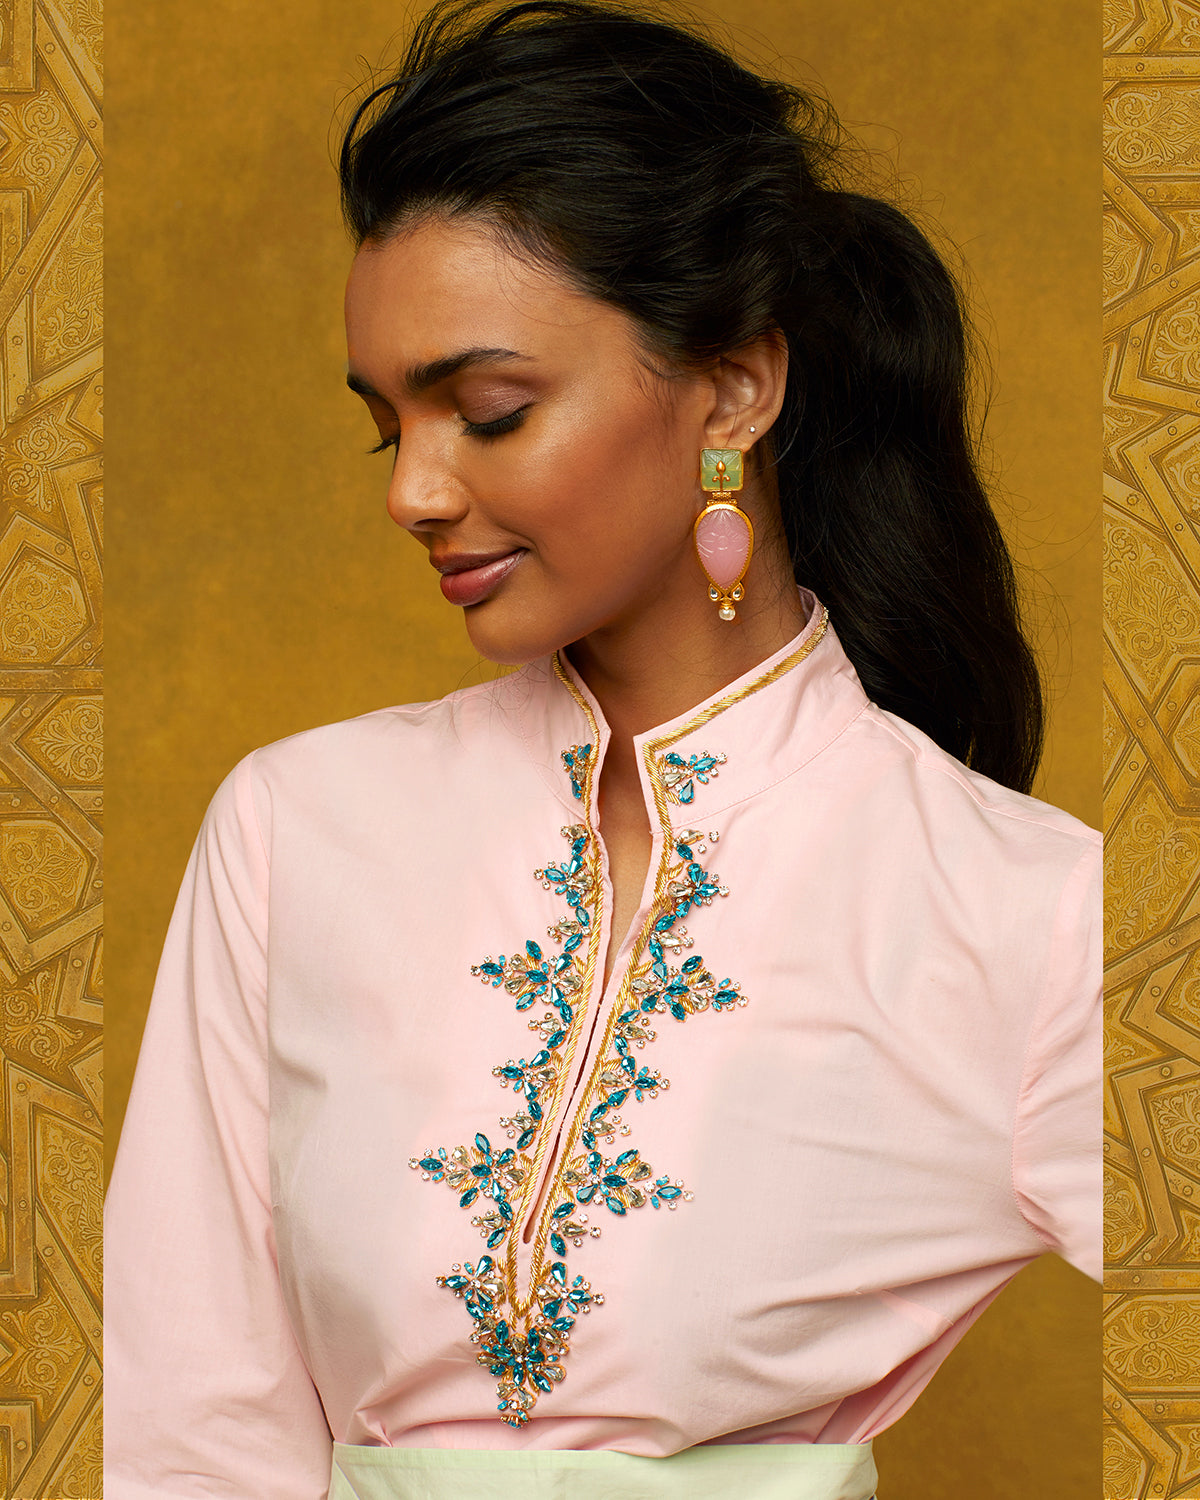 Circe Tunic in Blush Pink with Crystals and Gold Embroidery-Closeup Portrait